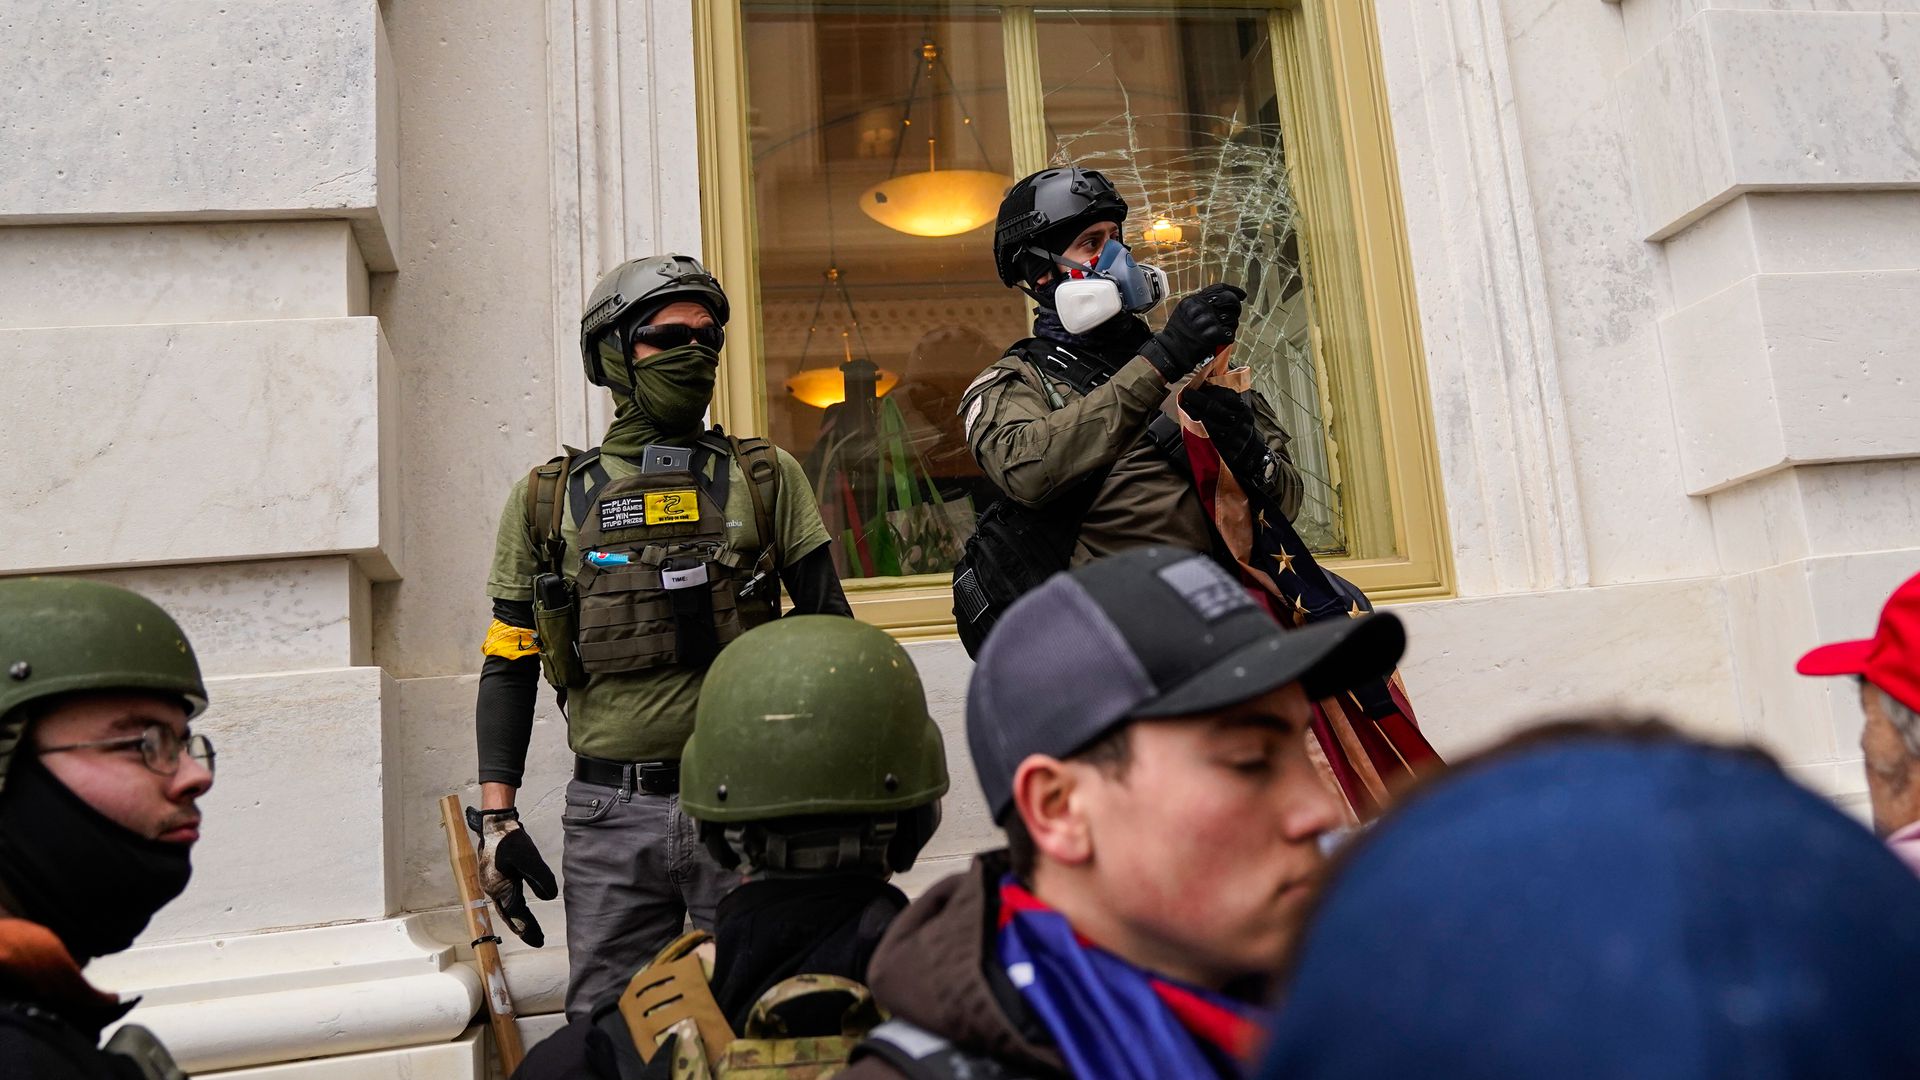 Rioters at the Jan 6 Capitol wearing military gear.